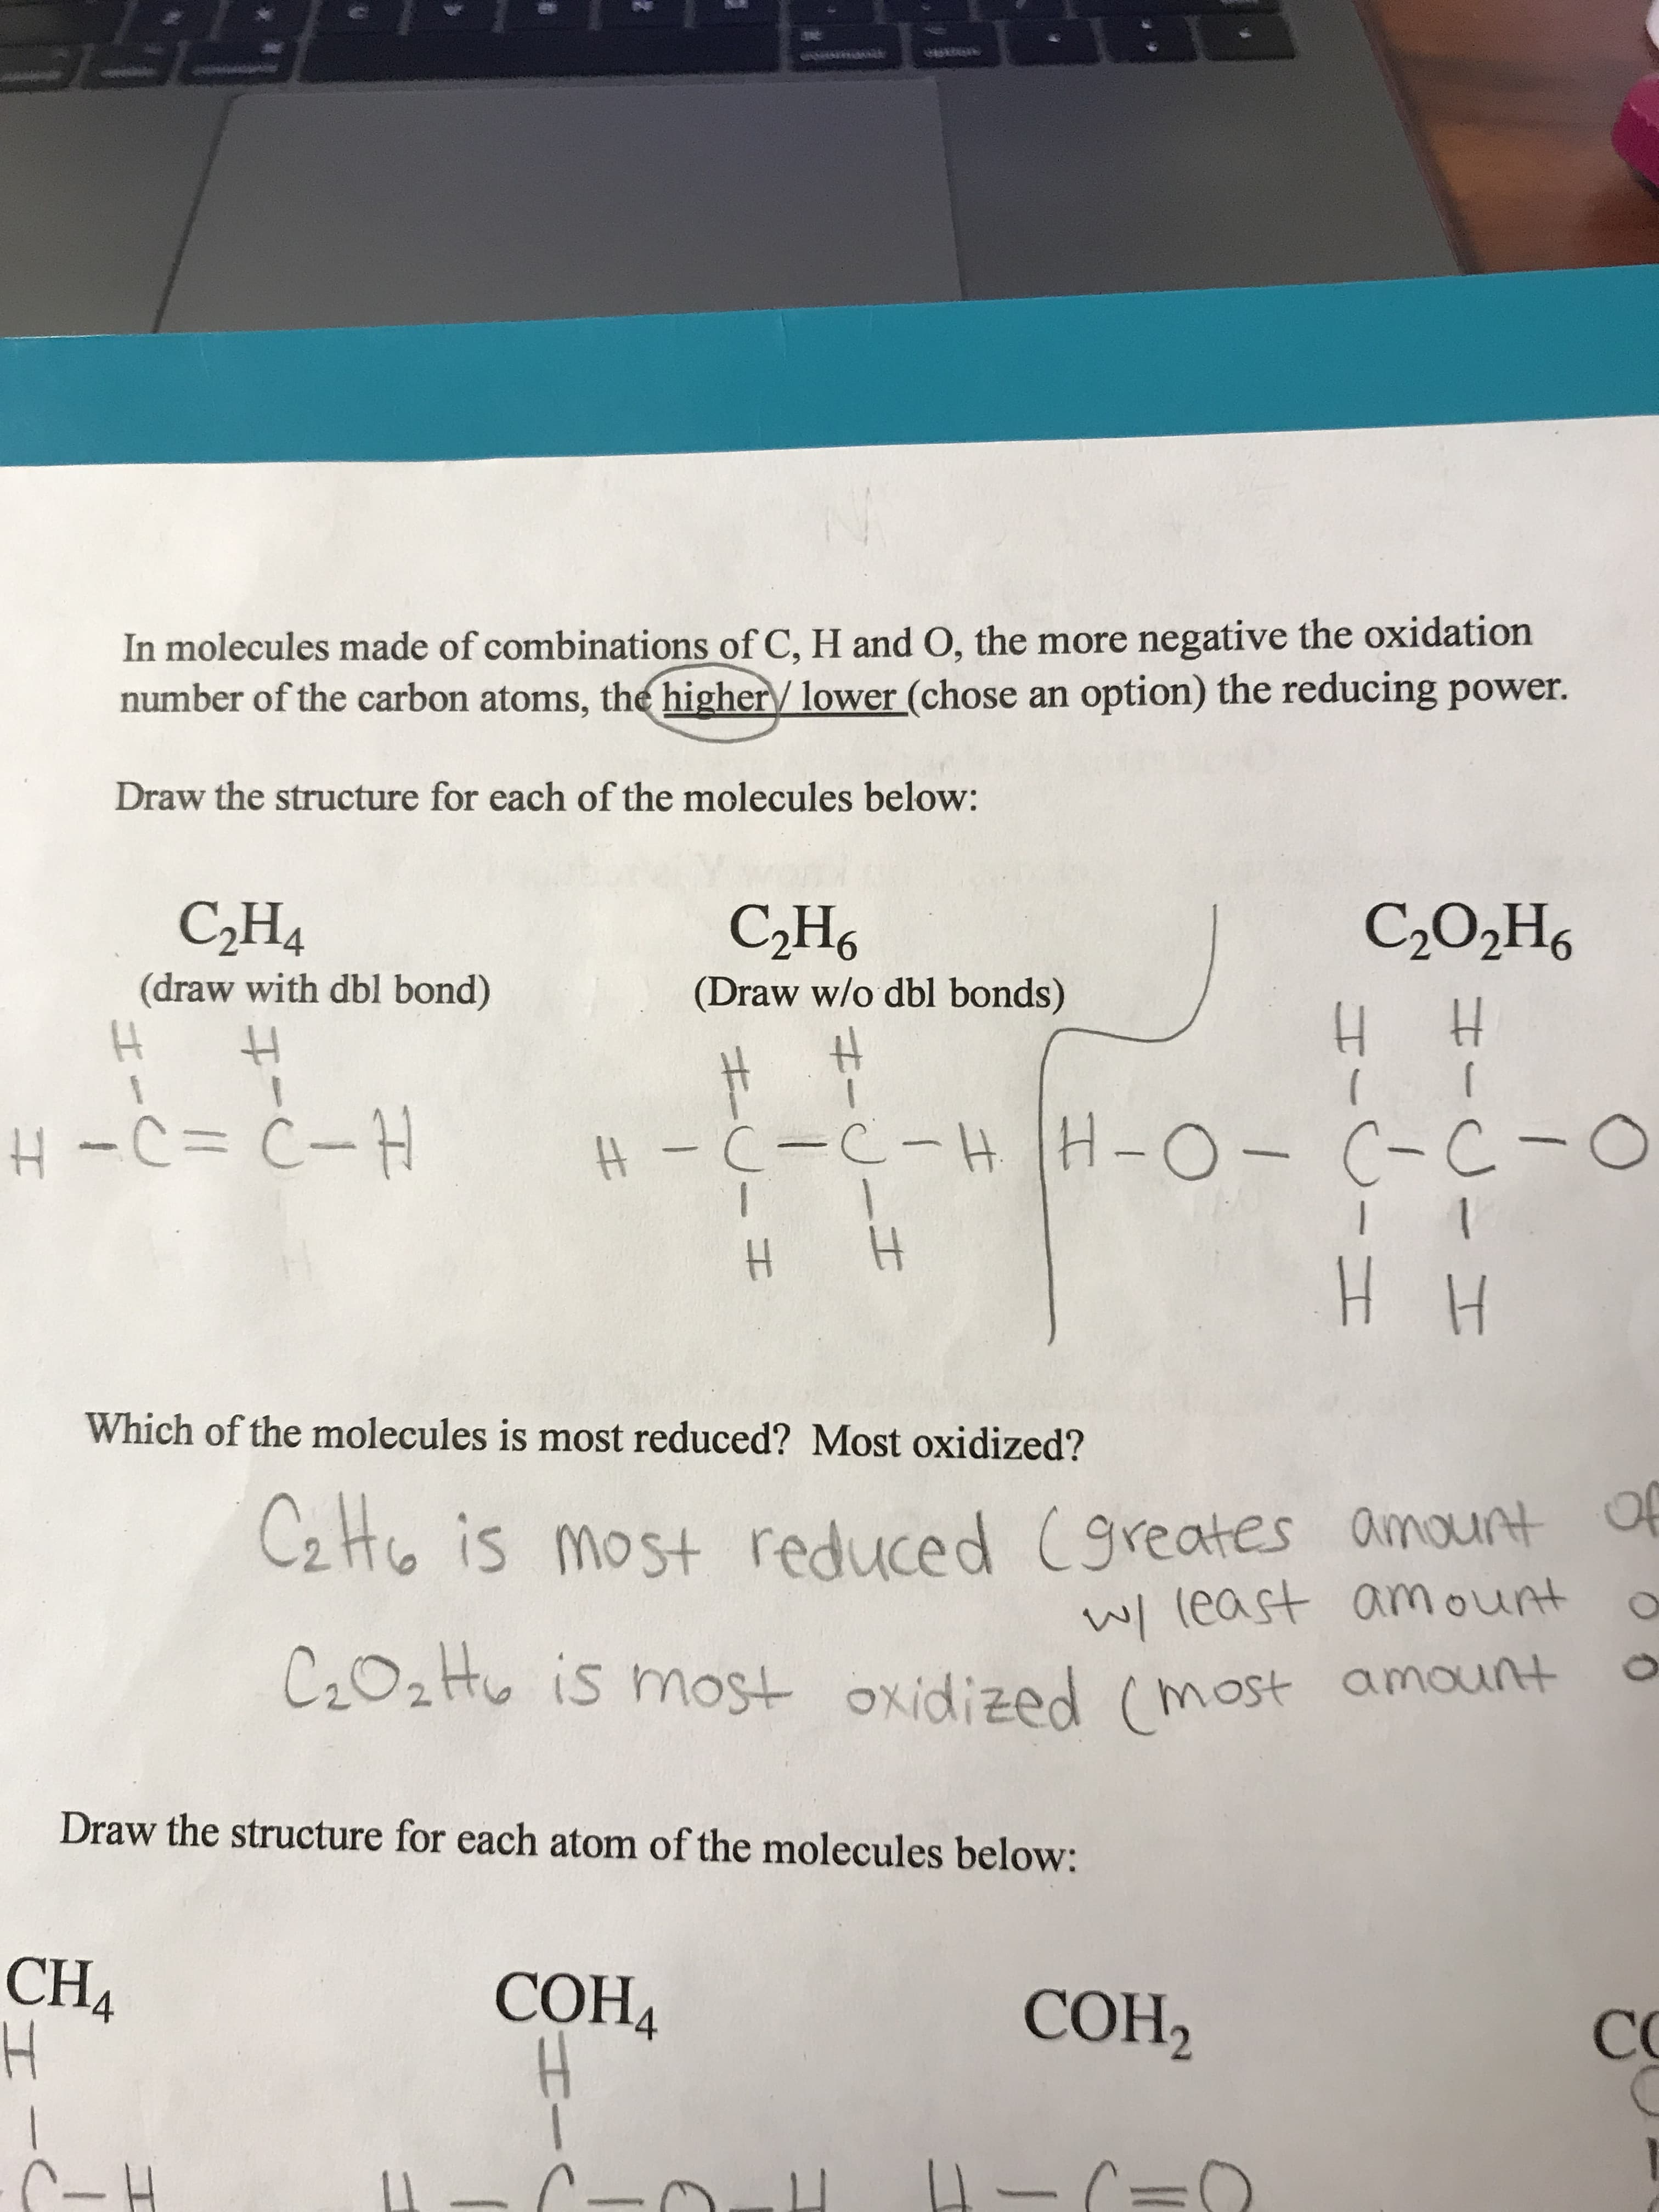 In molecules made of combinations of C, H and O, the more negative the oxidation
number of the carbon atoms, the higher lower (chose an option) the reducing power.
Draw the structure for each of the molecules below:
СНа
C202H6
СН6
(draw with dbl bond)
(Draw w/o dbl bonds)
H H
H-QICIT
#- C-C-HH-O-C-C-O
| 1
1
HH
Which of the molecules is most reduced? Most oxidized?
C2Ho is most reduced (9reates amount
w(east amount
C202H is most oxidized (most amount
Draw the structure for each atom of the molecules below:
CH4
H
СОНА
СОН,
СС
C-H
